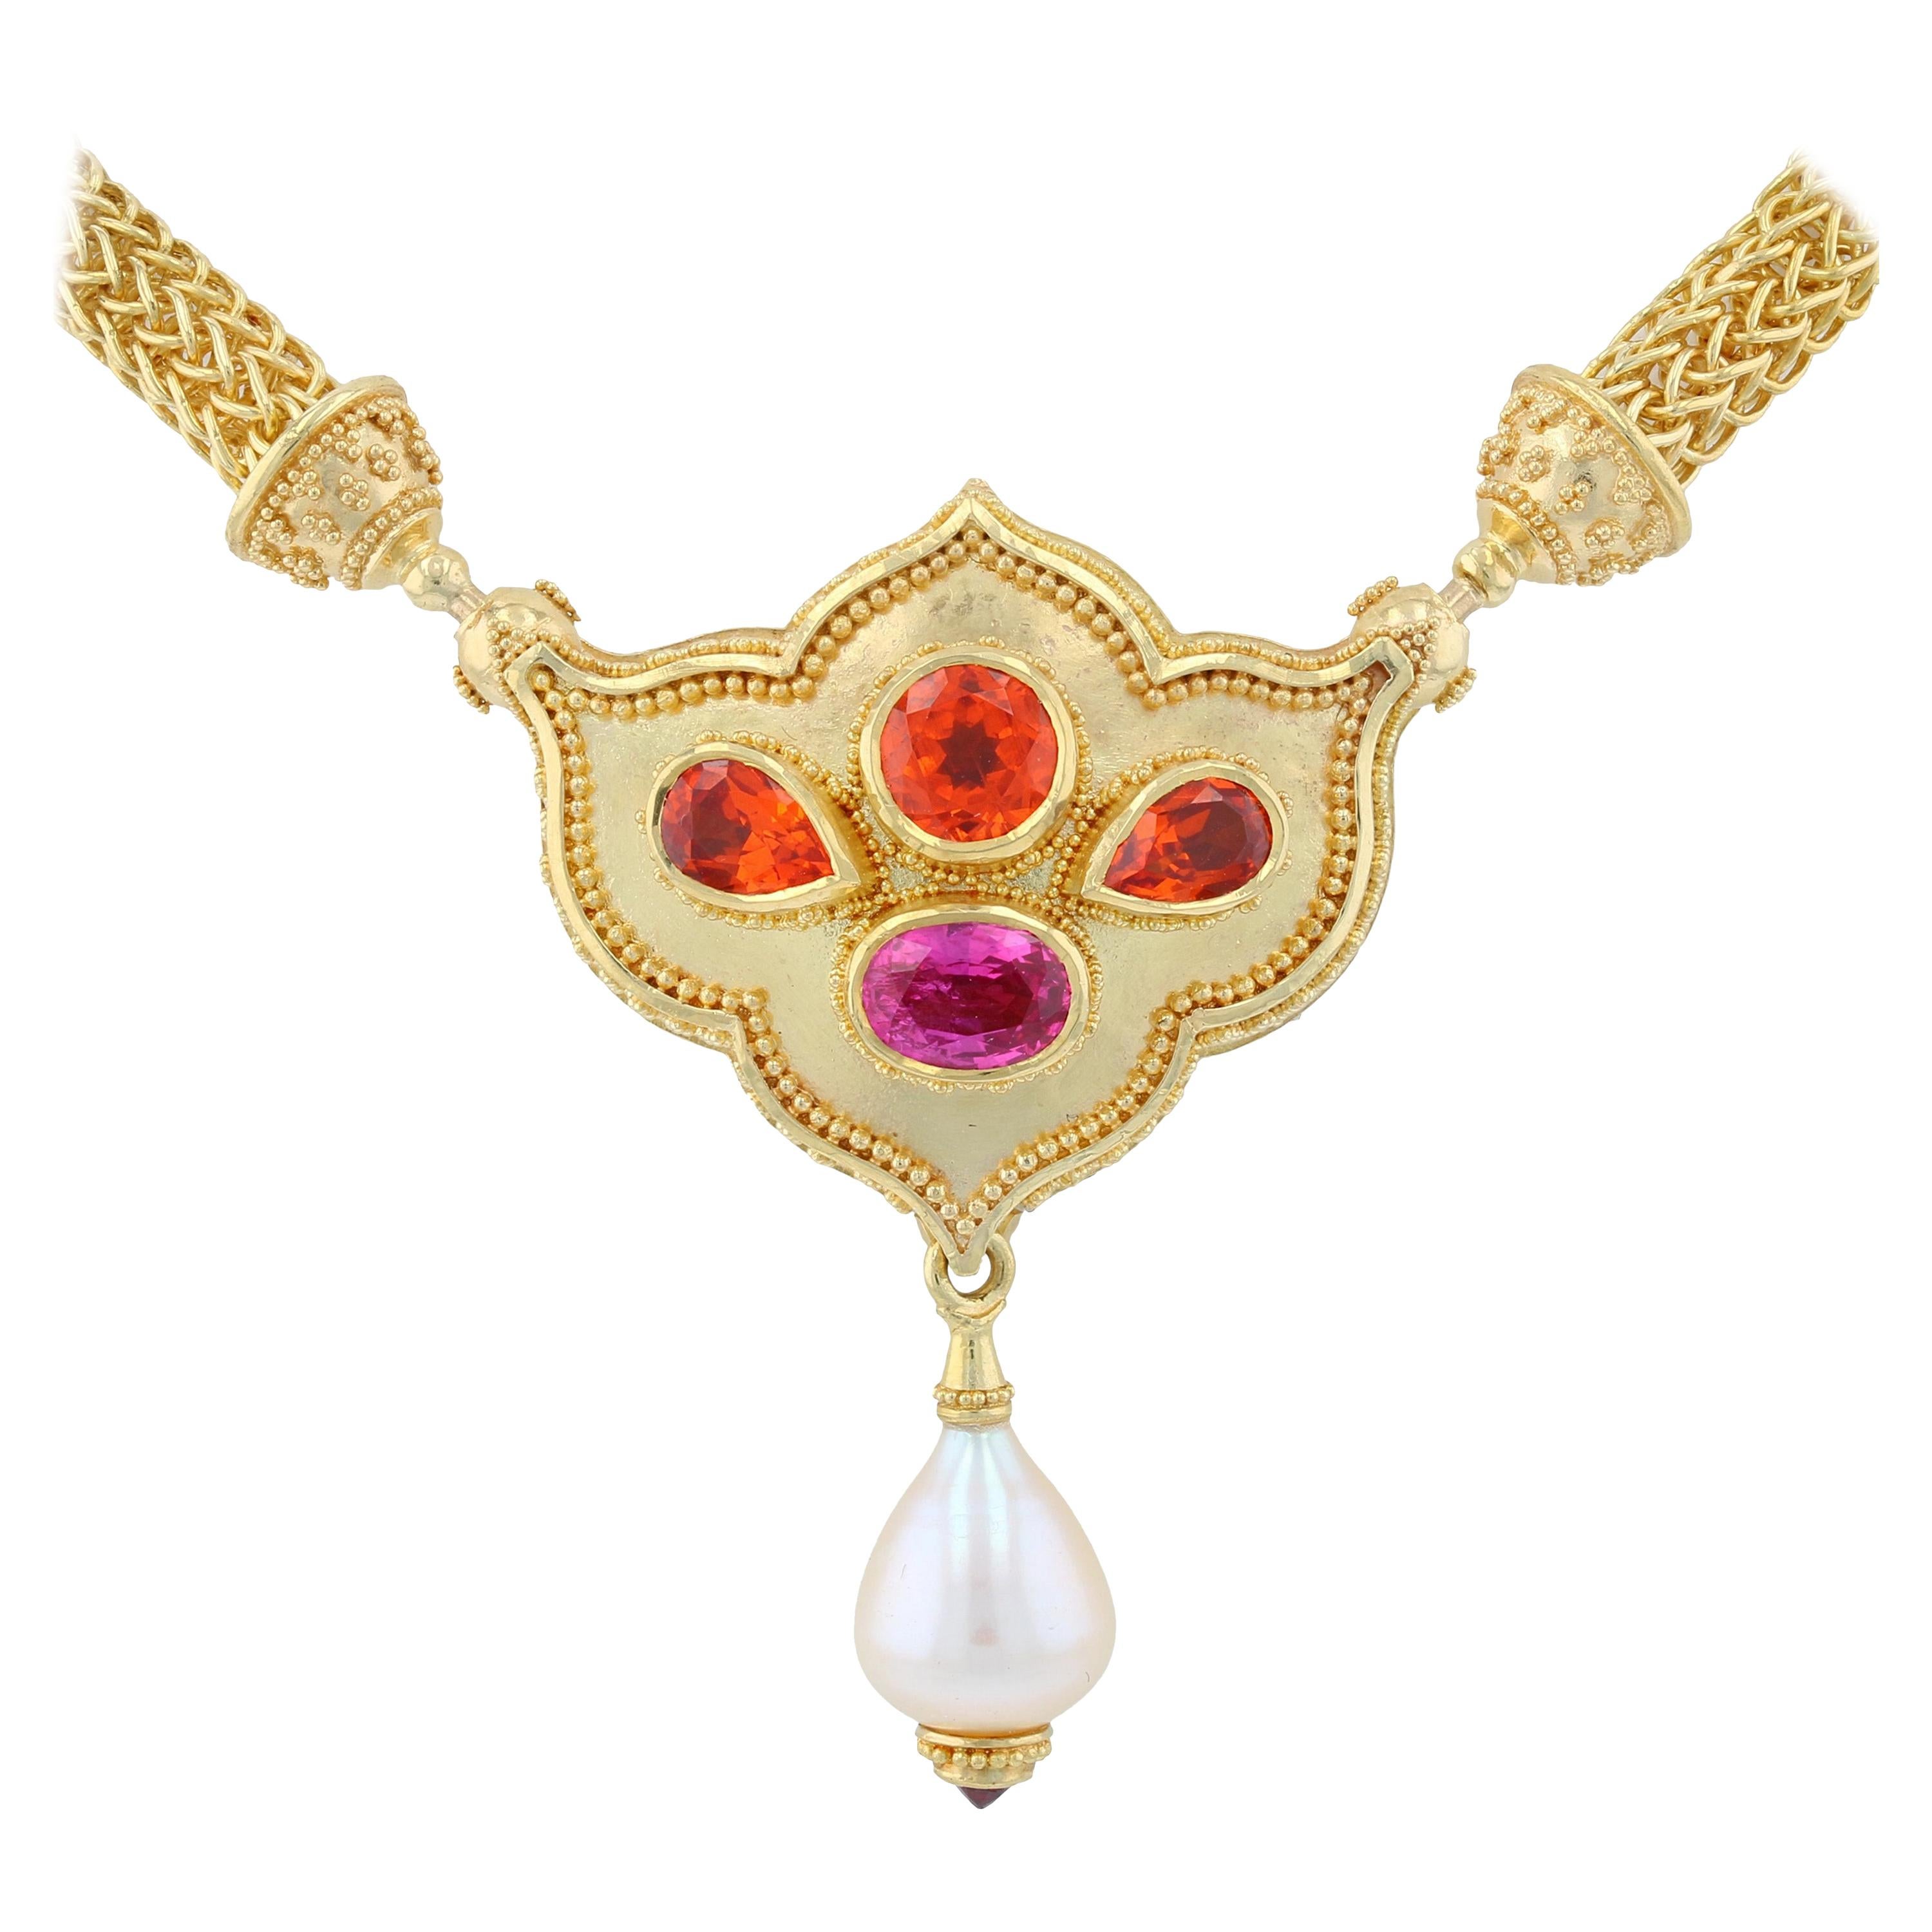 Kent Raible's Flower Jewel 18K Pendant Necklace with Mandarin Garnets and Spinel For Sale